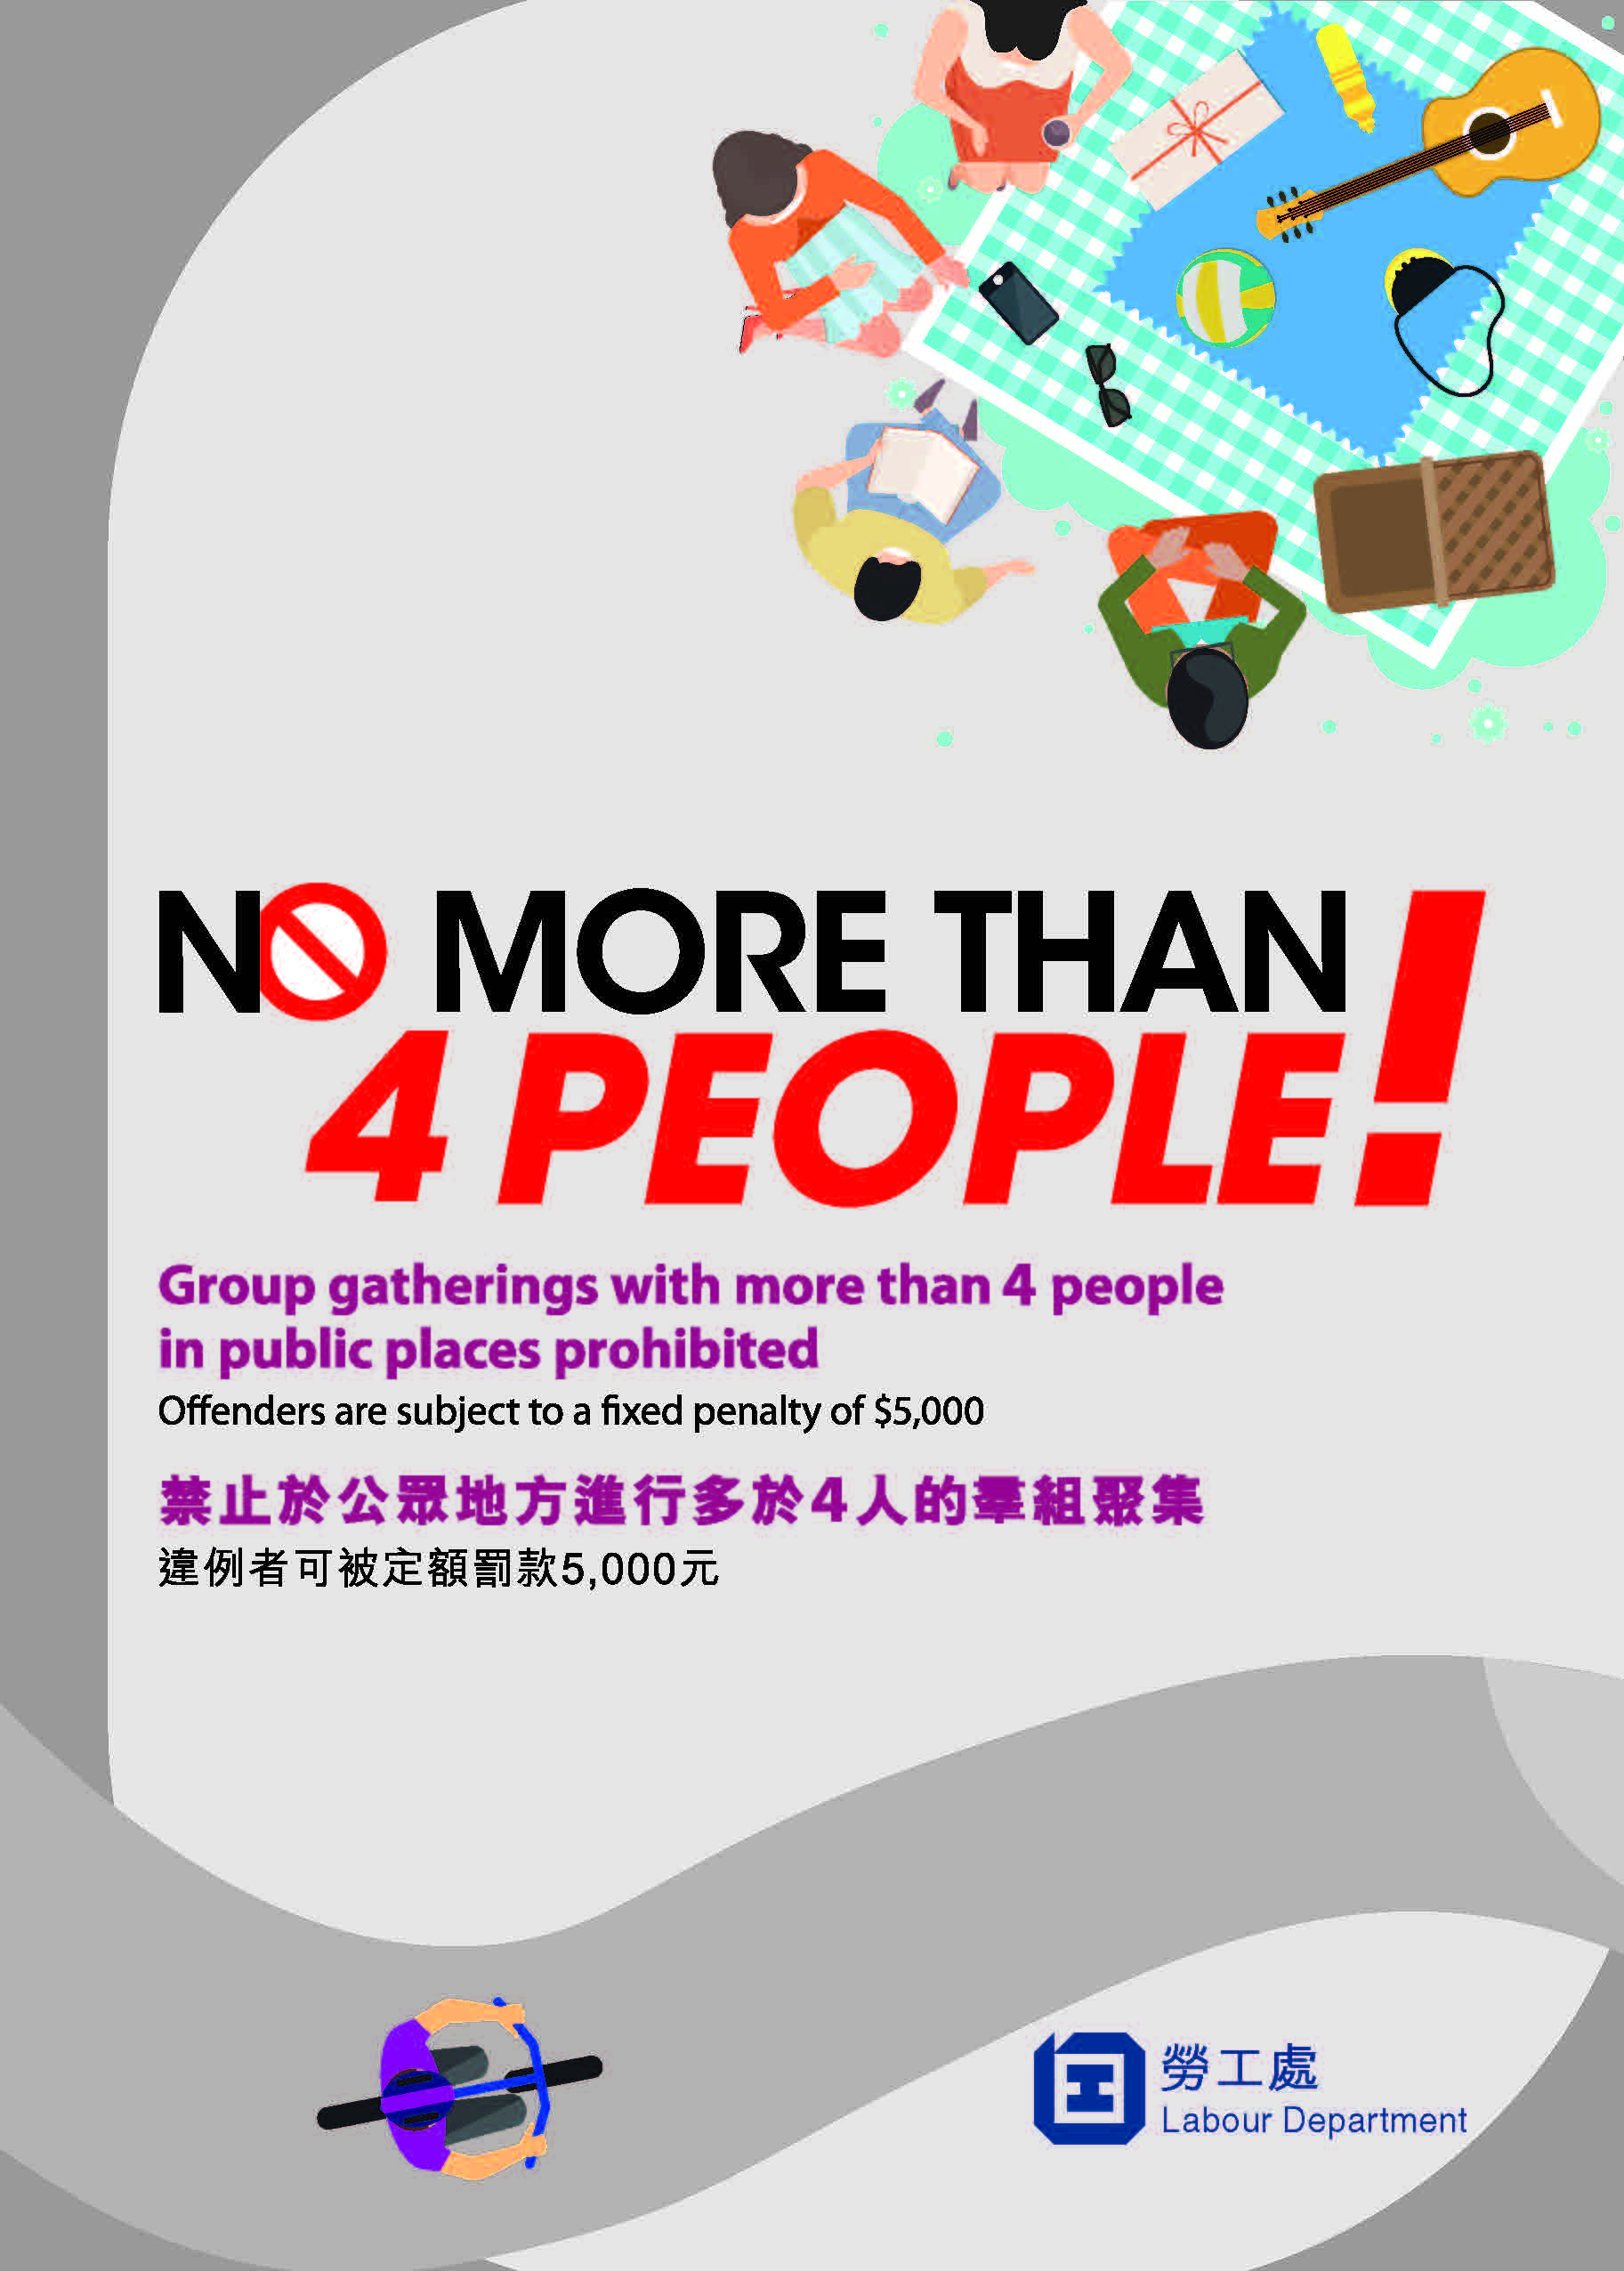 Leaflet and Poster on "Group gatherings with more than 4 people in public places prohibited"